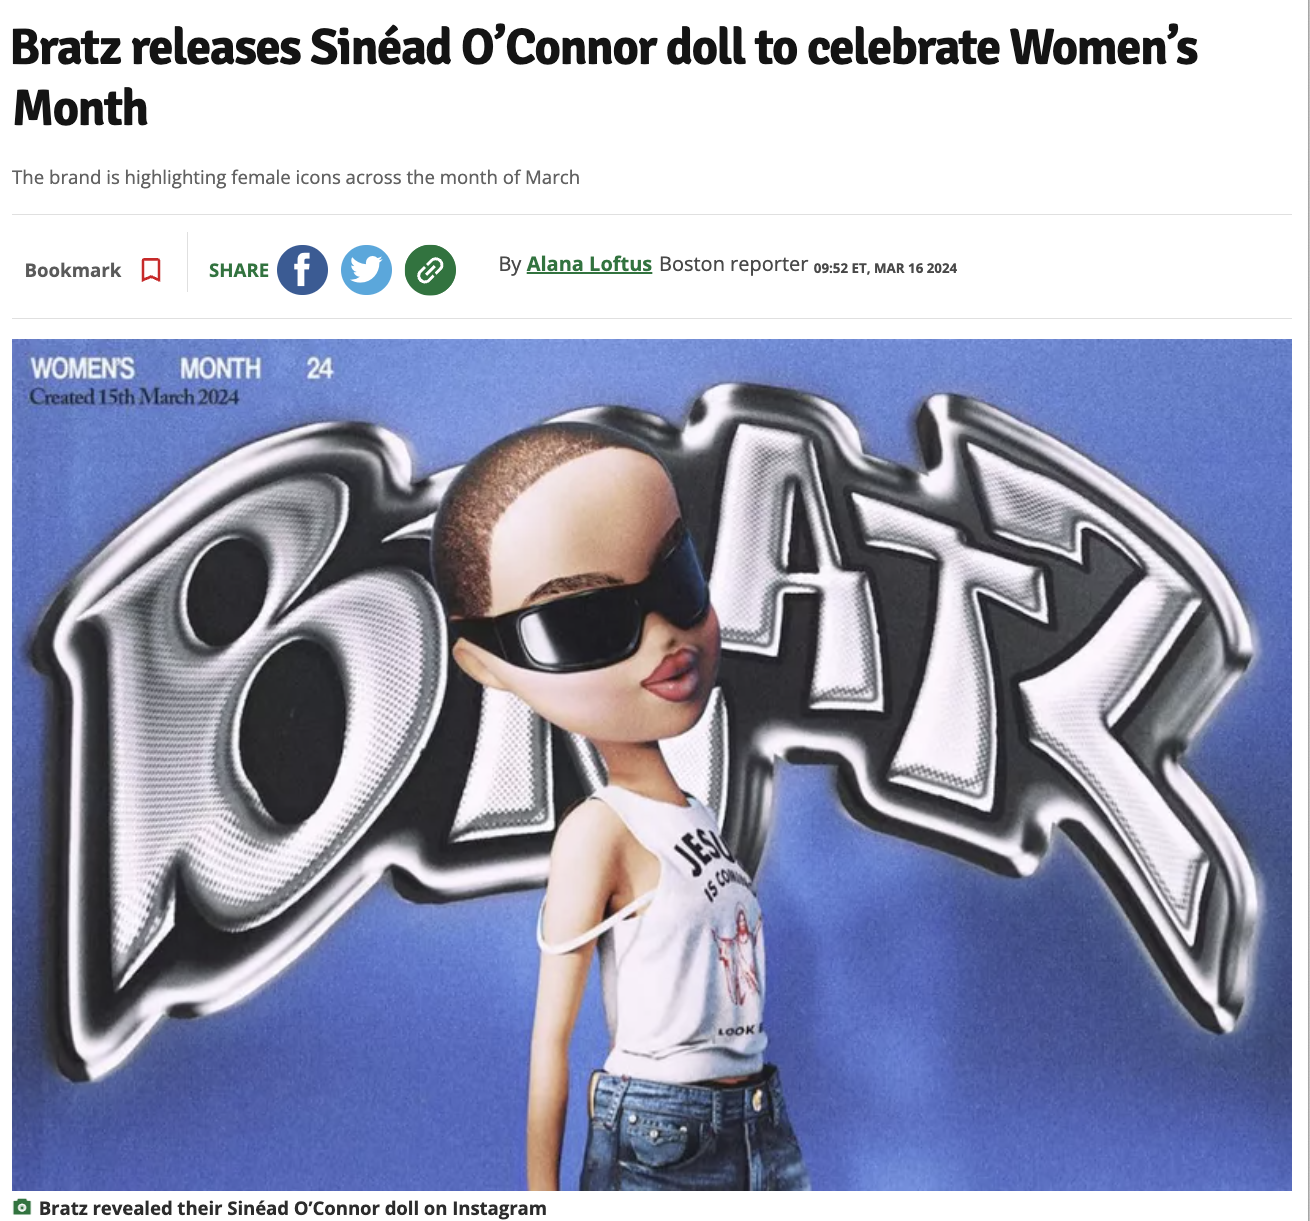 goggles - Bratz releases Sinad O'Connor doll to celebrate Women's Month The brand is highlighting female icons across the month of March Bookmark f By Alana Loftus Boston reporter auster, Mr 16 2804 Women'S Month 24 Coated 15th Bratz revealed their Sinad 